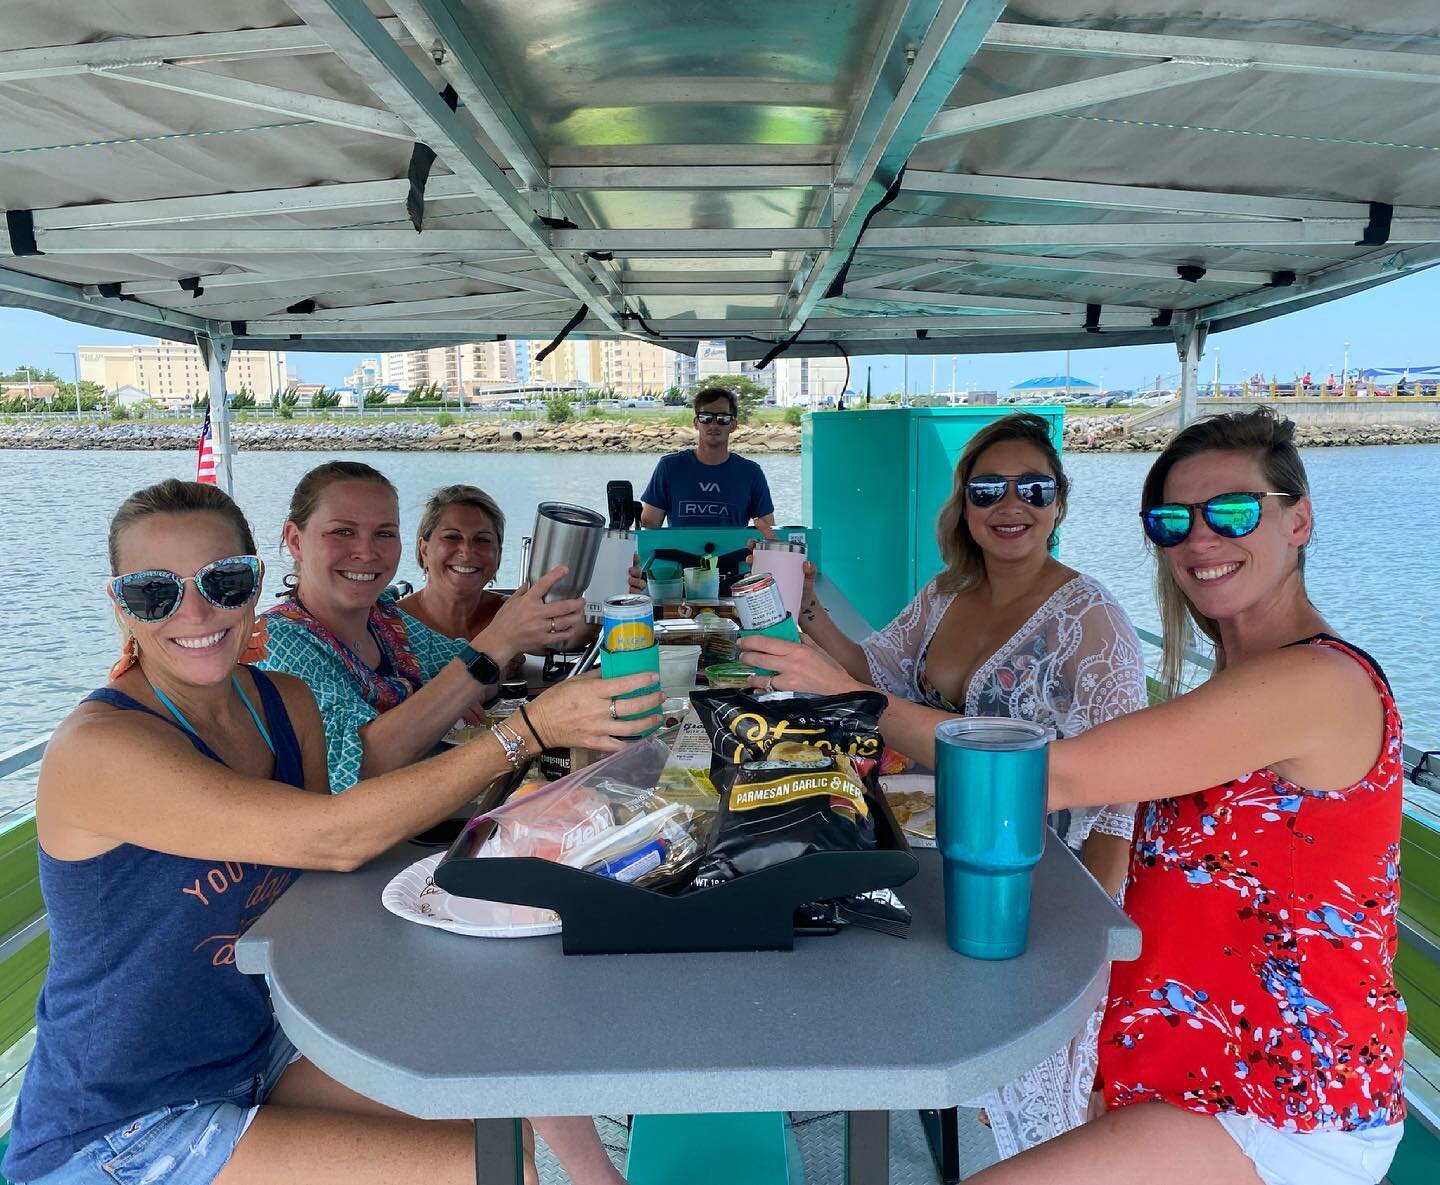 Cheers! Happy Friday. There&rsquo;s still cruises available this weekend. @cbpedalclub #cycleboat #boozecruise #virginiabeachoceanfront #rudeeinlet